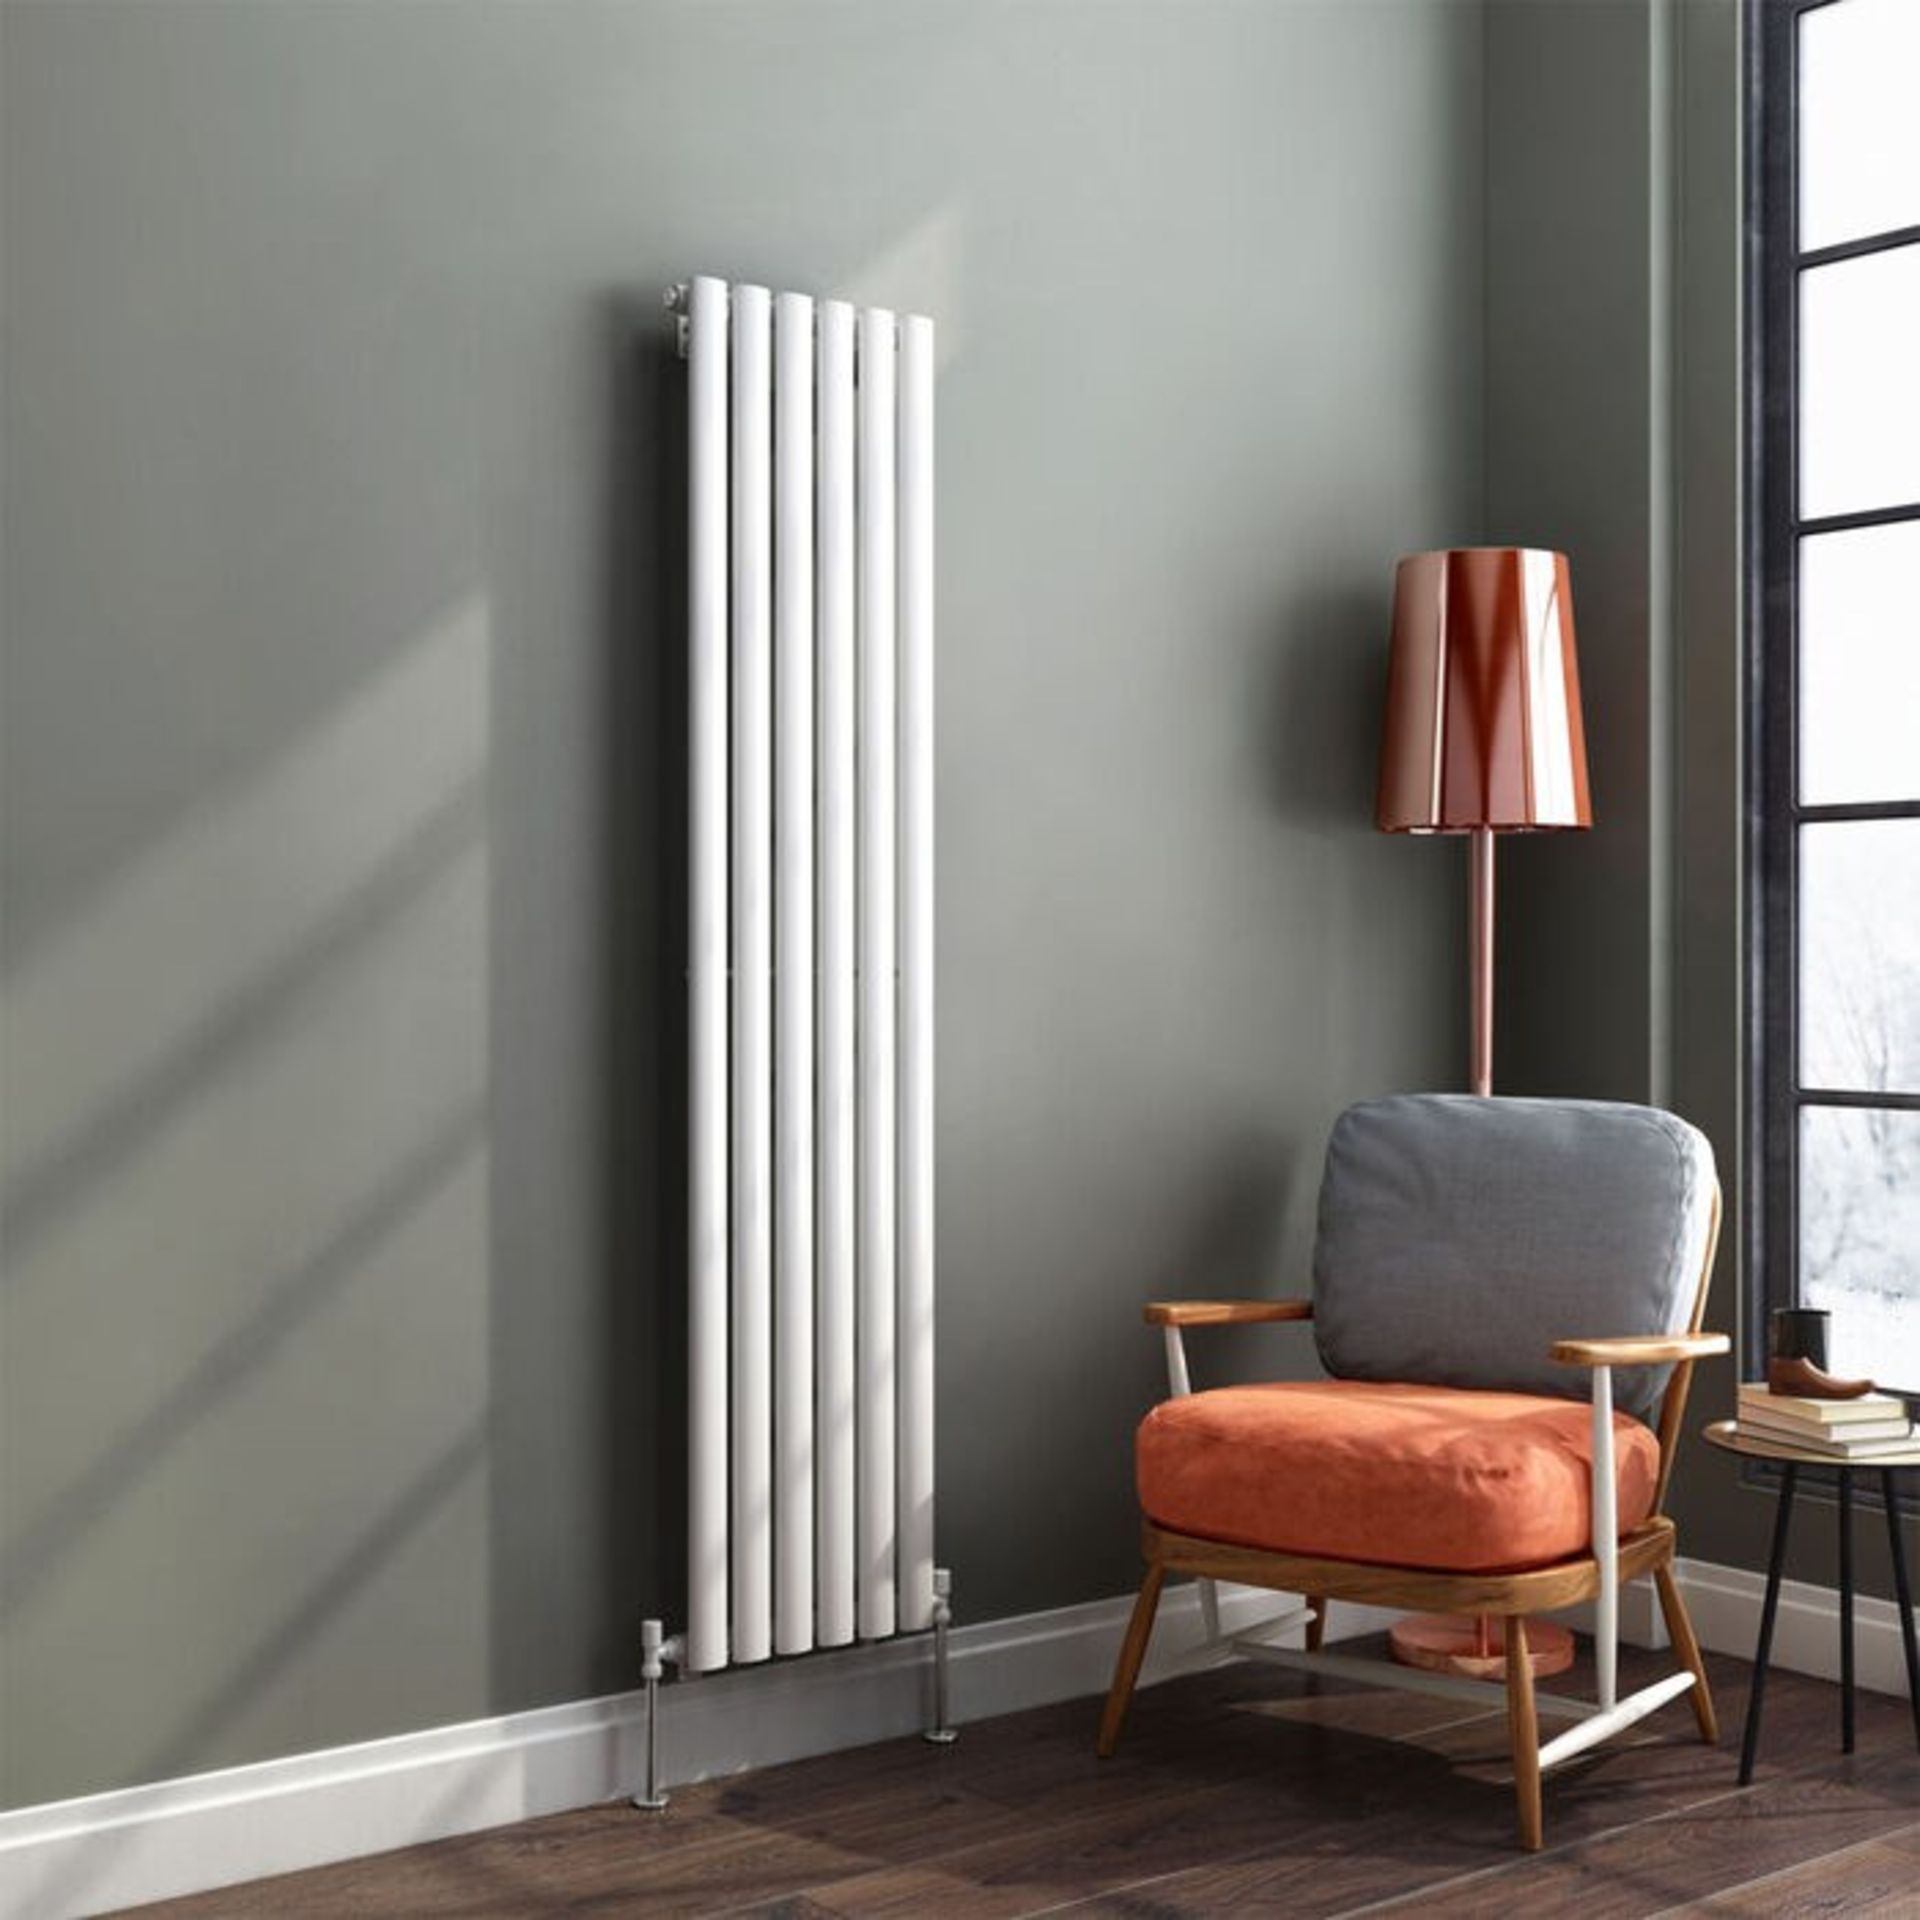 Brand New 1800x360mm Gloss White Single Oval Tube Vertical Radiator.RRP £344.97.Made from high quali - Image 2 of 3